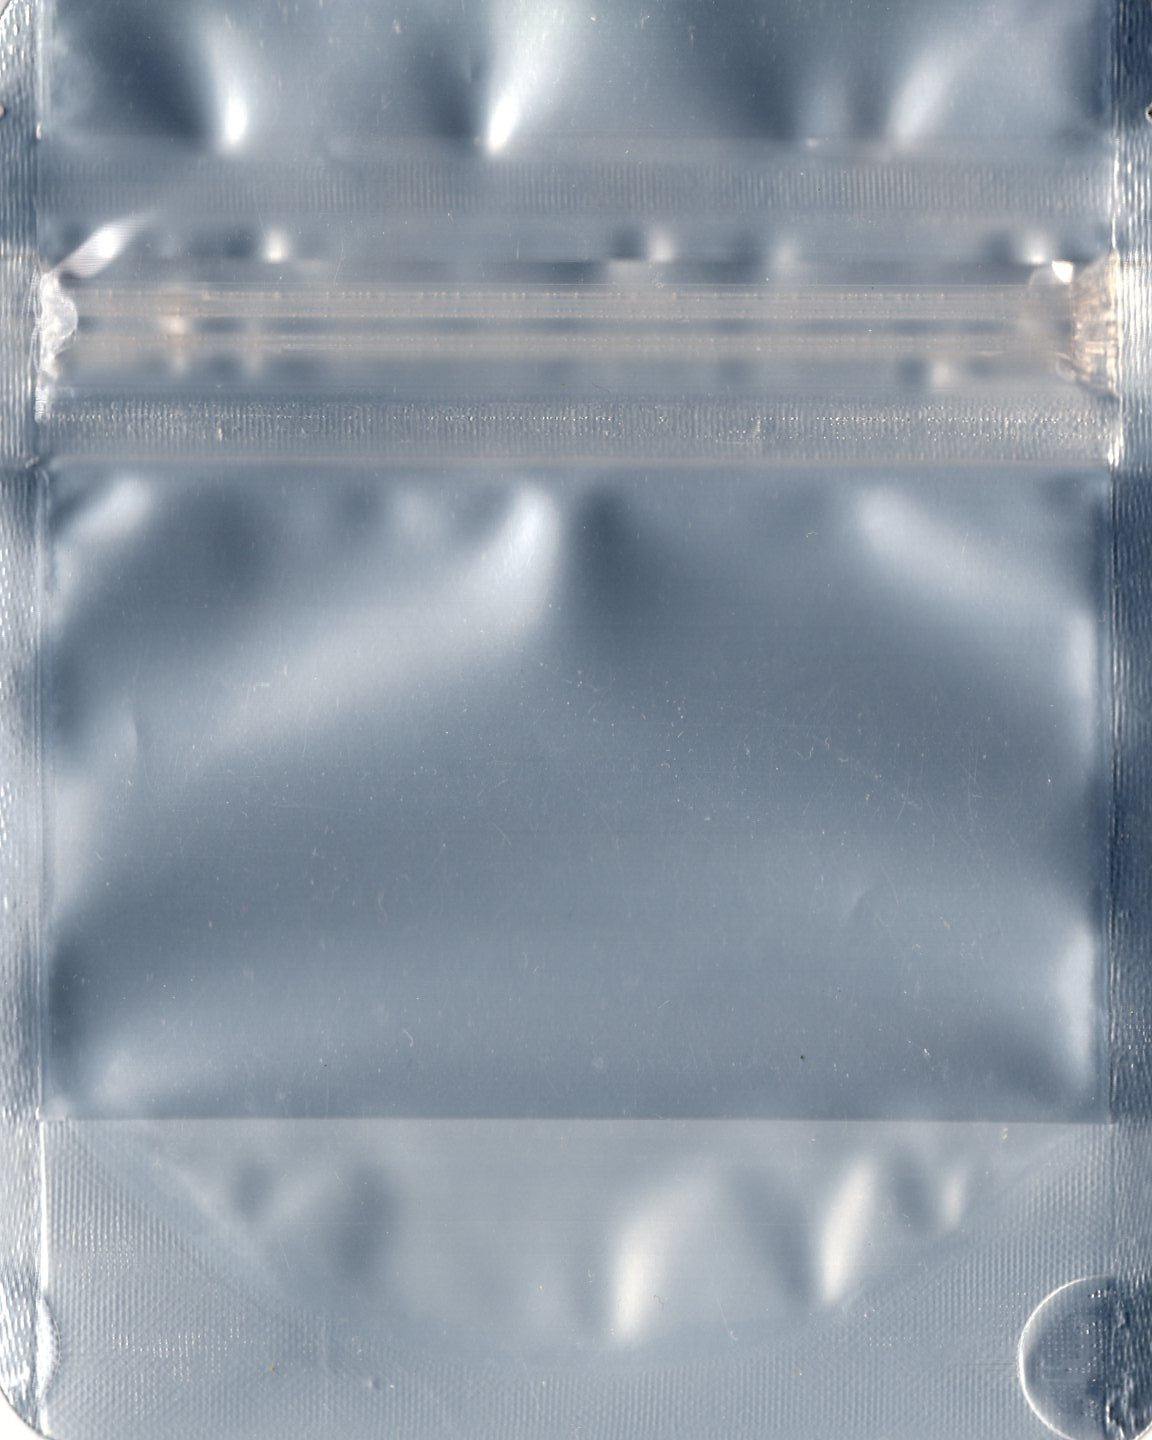 ONE POUND - MYLAR CHILDPROOF BAGS - PLAIN BLACK/CLEAR